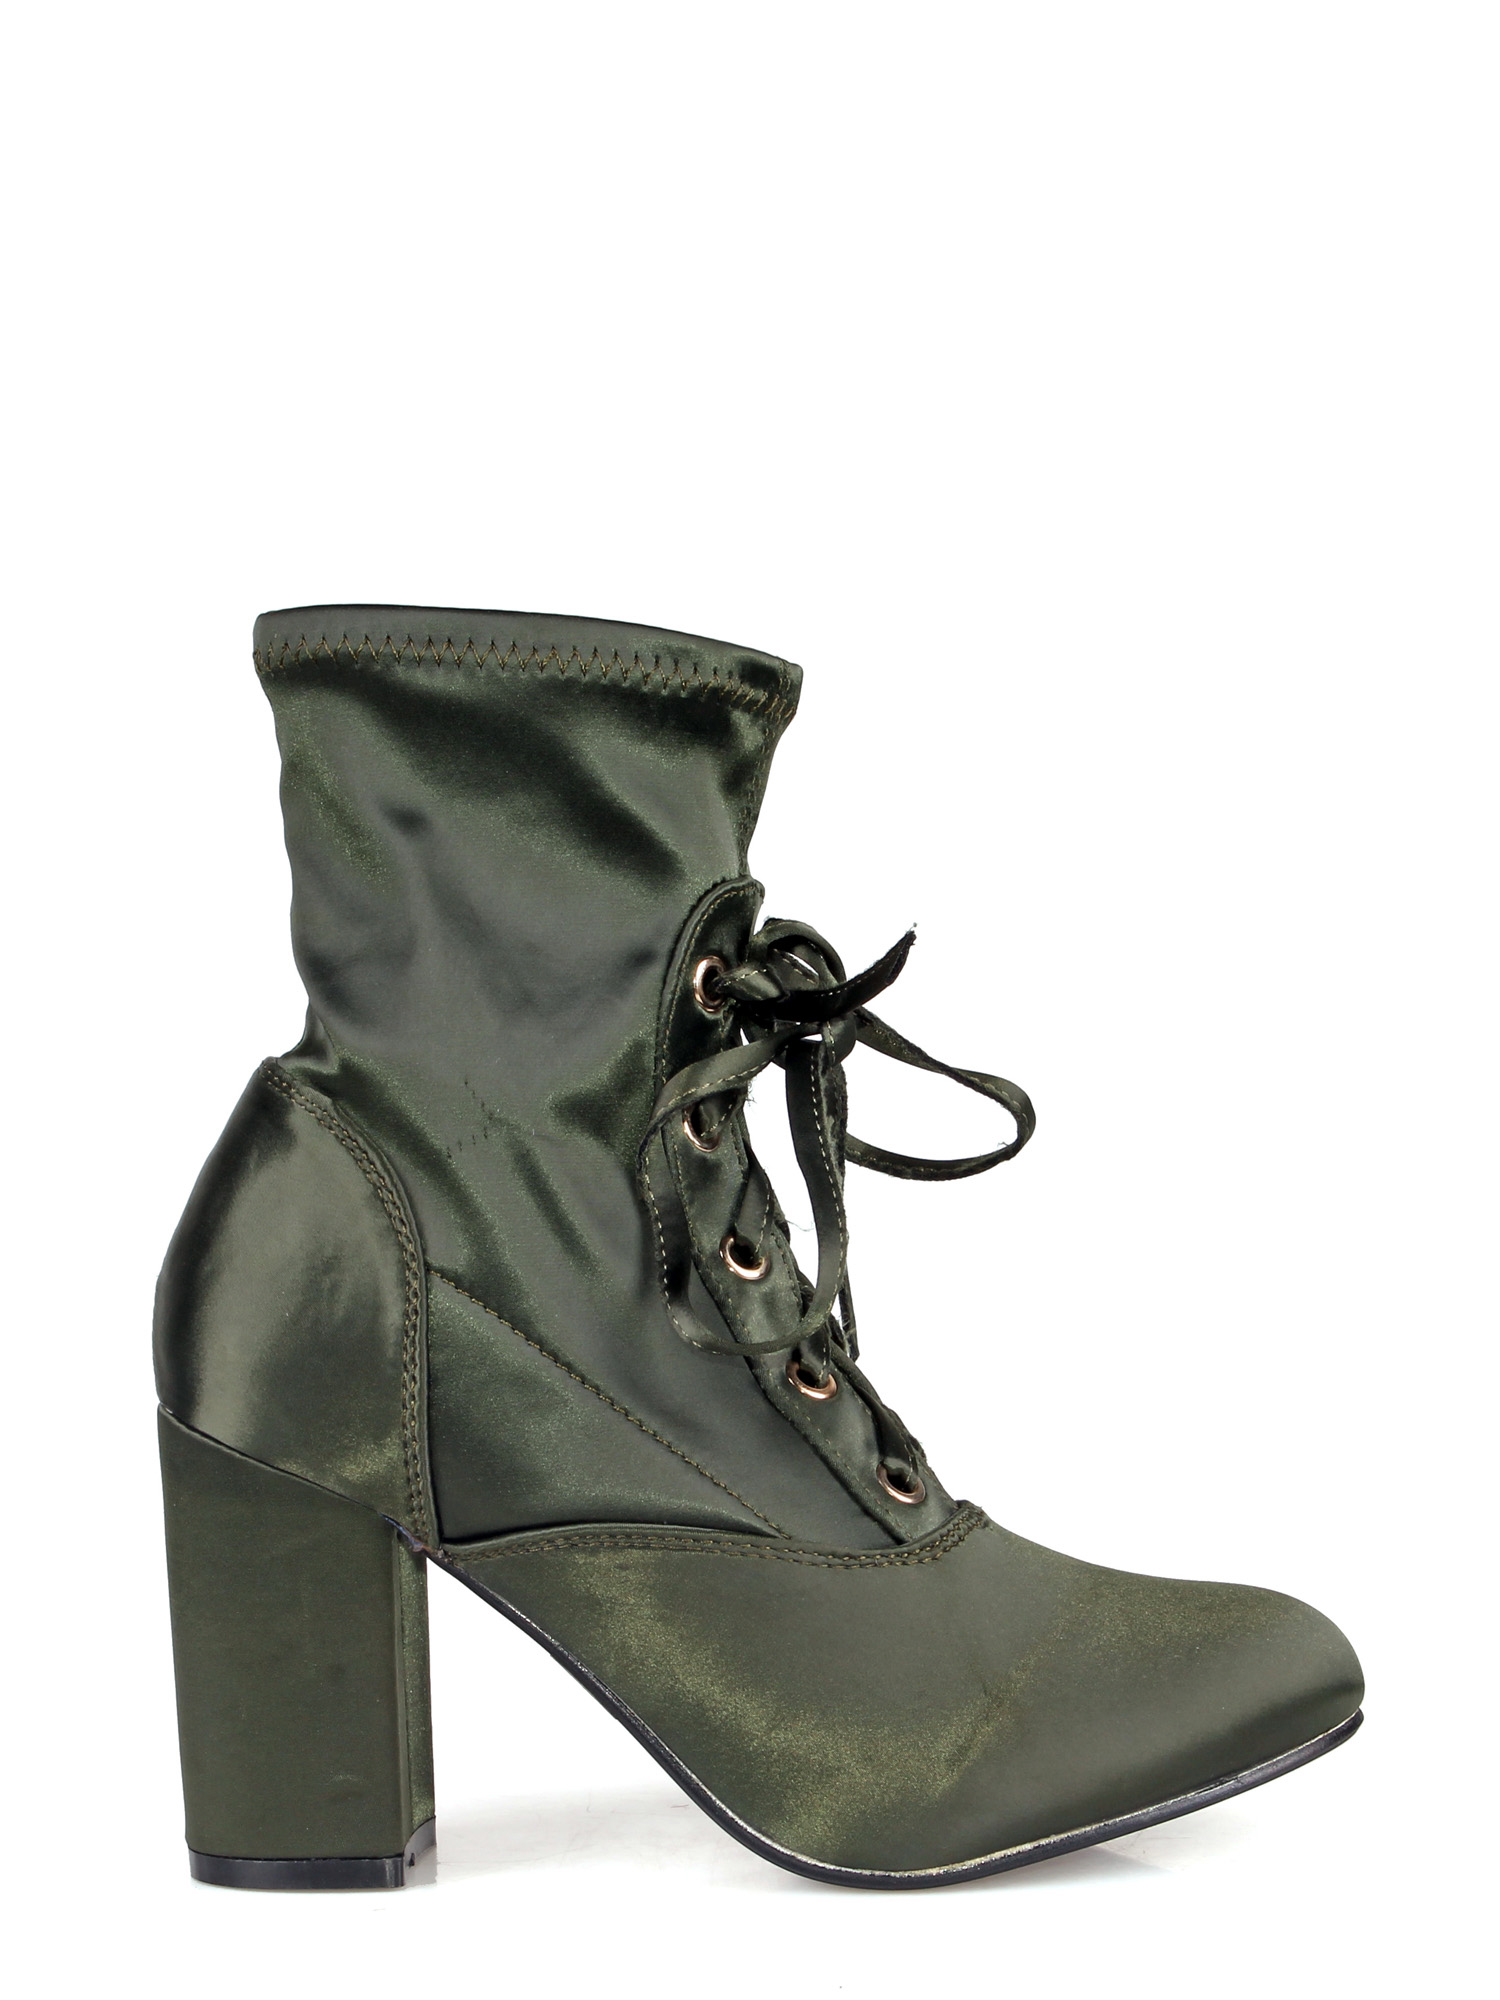 Nature Breeze Lace up Almond Toe Chunk Heel Women's Anke Boots in Olive - image 2 of 4